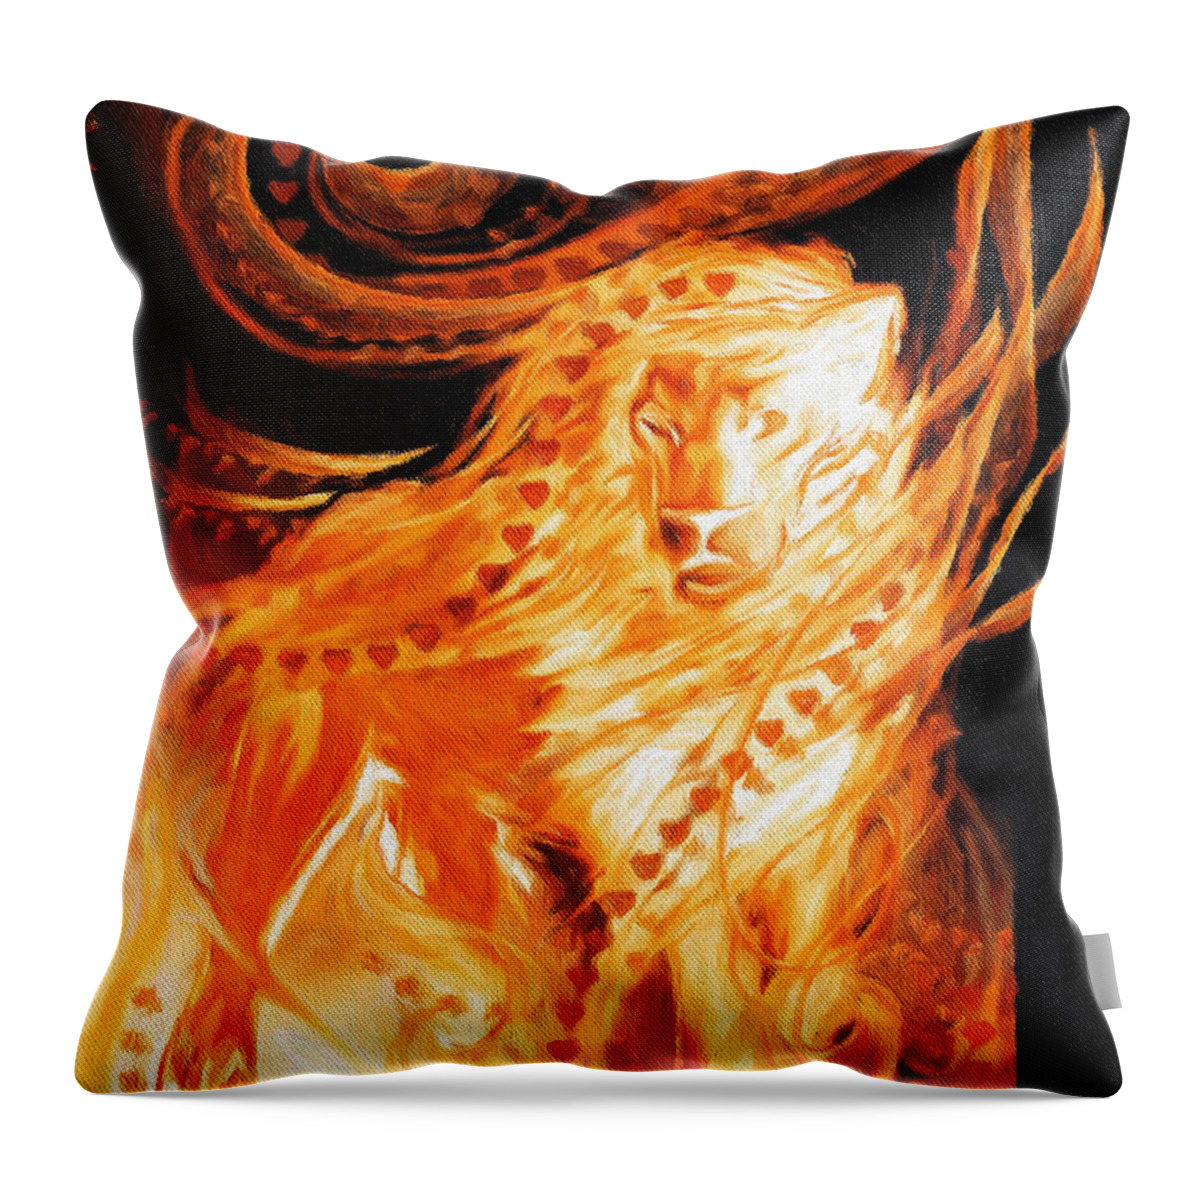 Prophetic Art Throw Pillow featuring the painting King by Pam Herrick